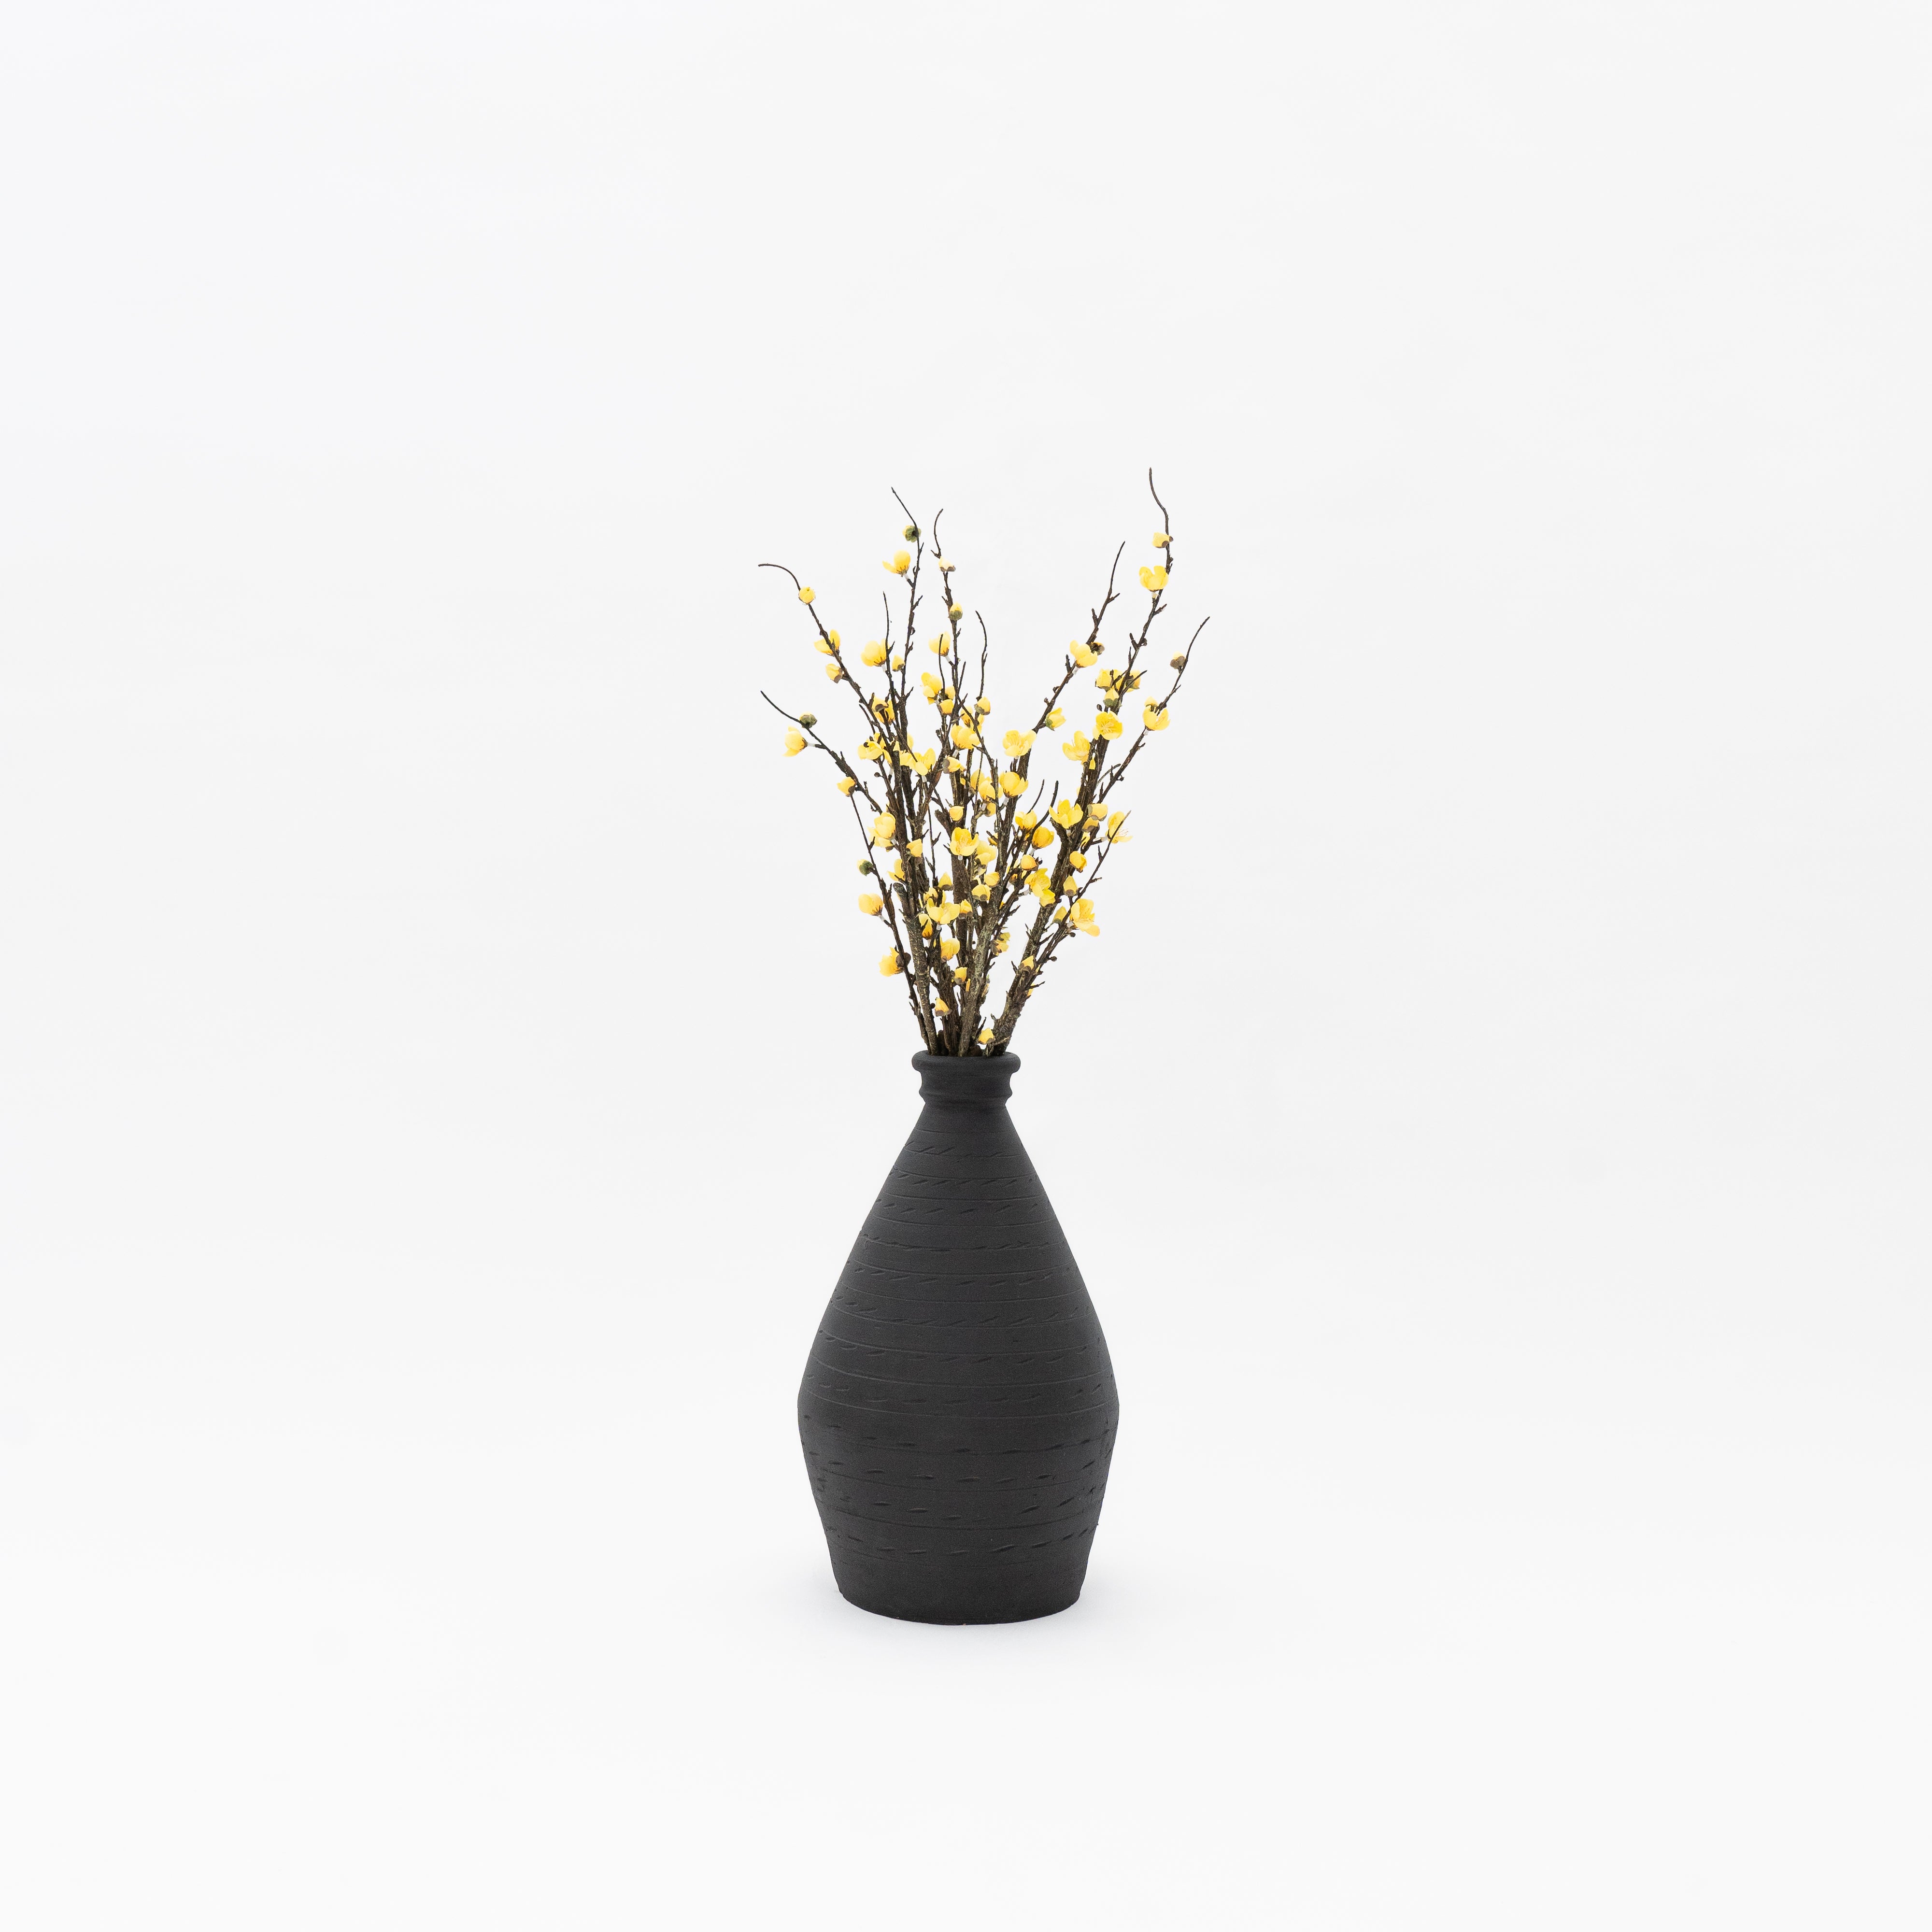 Artificial Plant - Cherry Blossom Yellow  - WS Living - UAE - Artificial Flowers Wood and steel Furnitures - Dubai